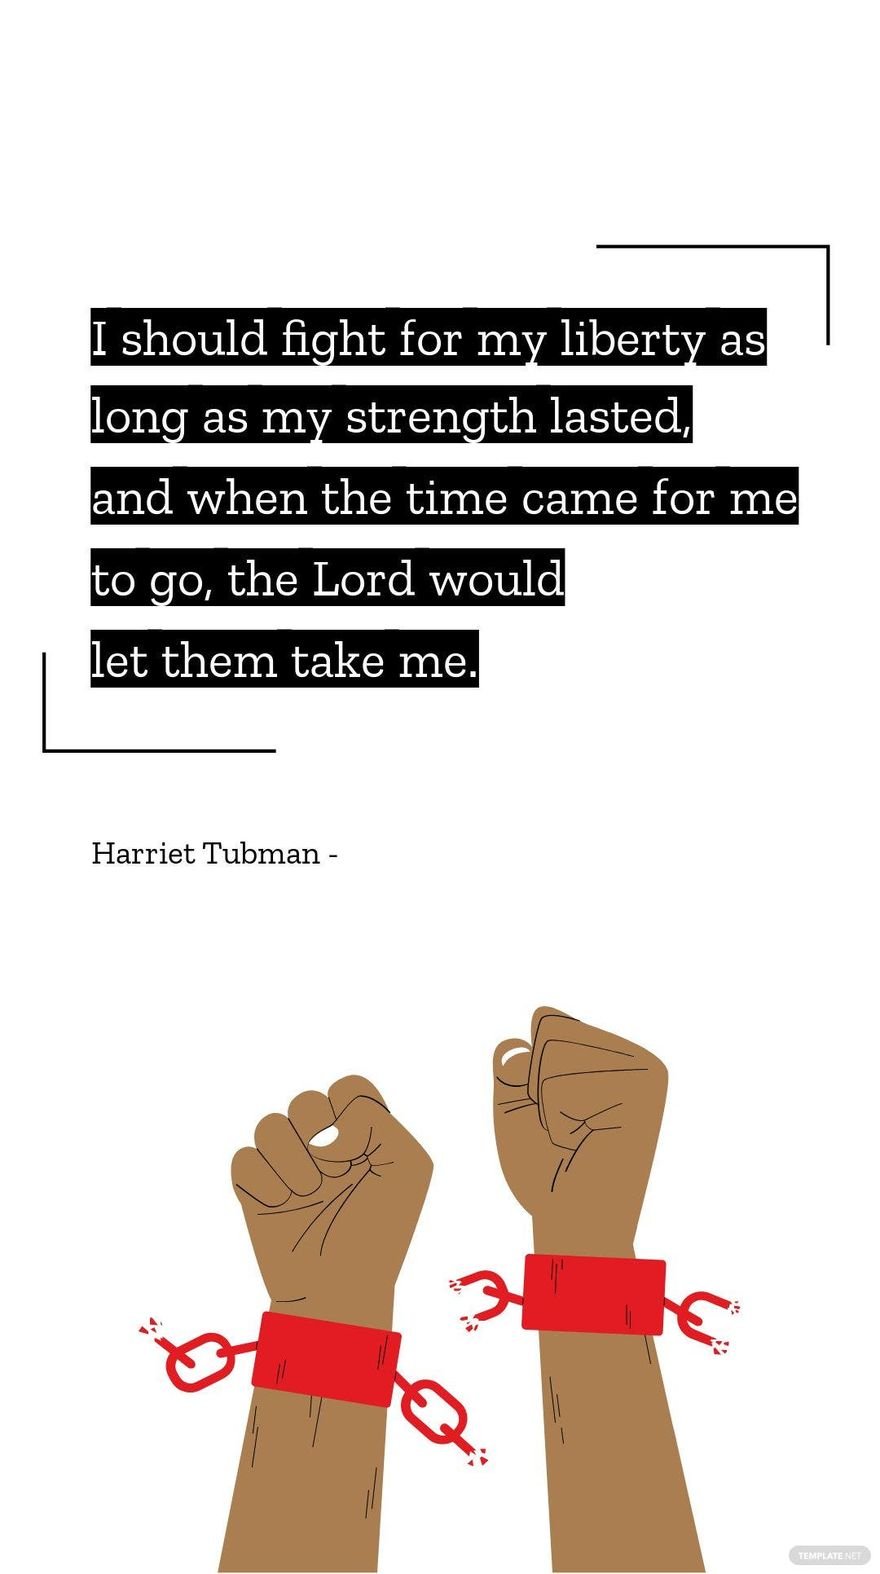 Free Harriet Tubman - I should fight for my liberty as long as my strength lasted, and when the time came for me to go, the Lord would let them take me. in JPG